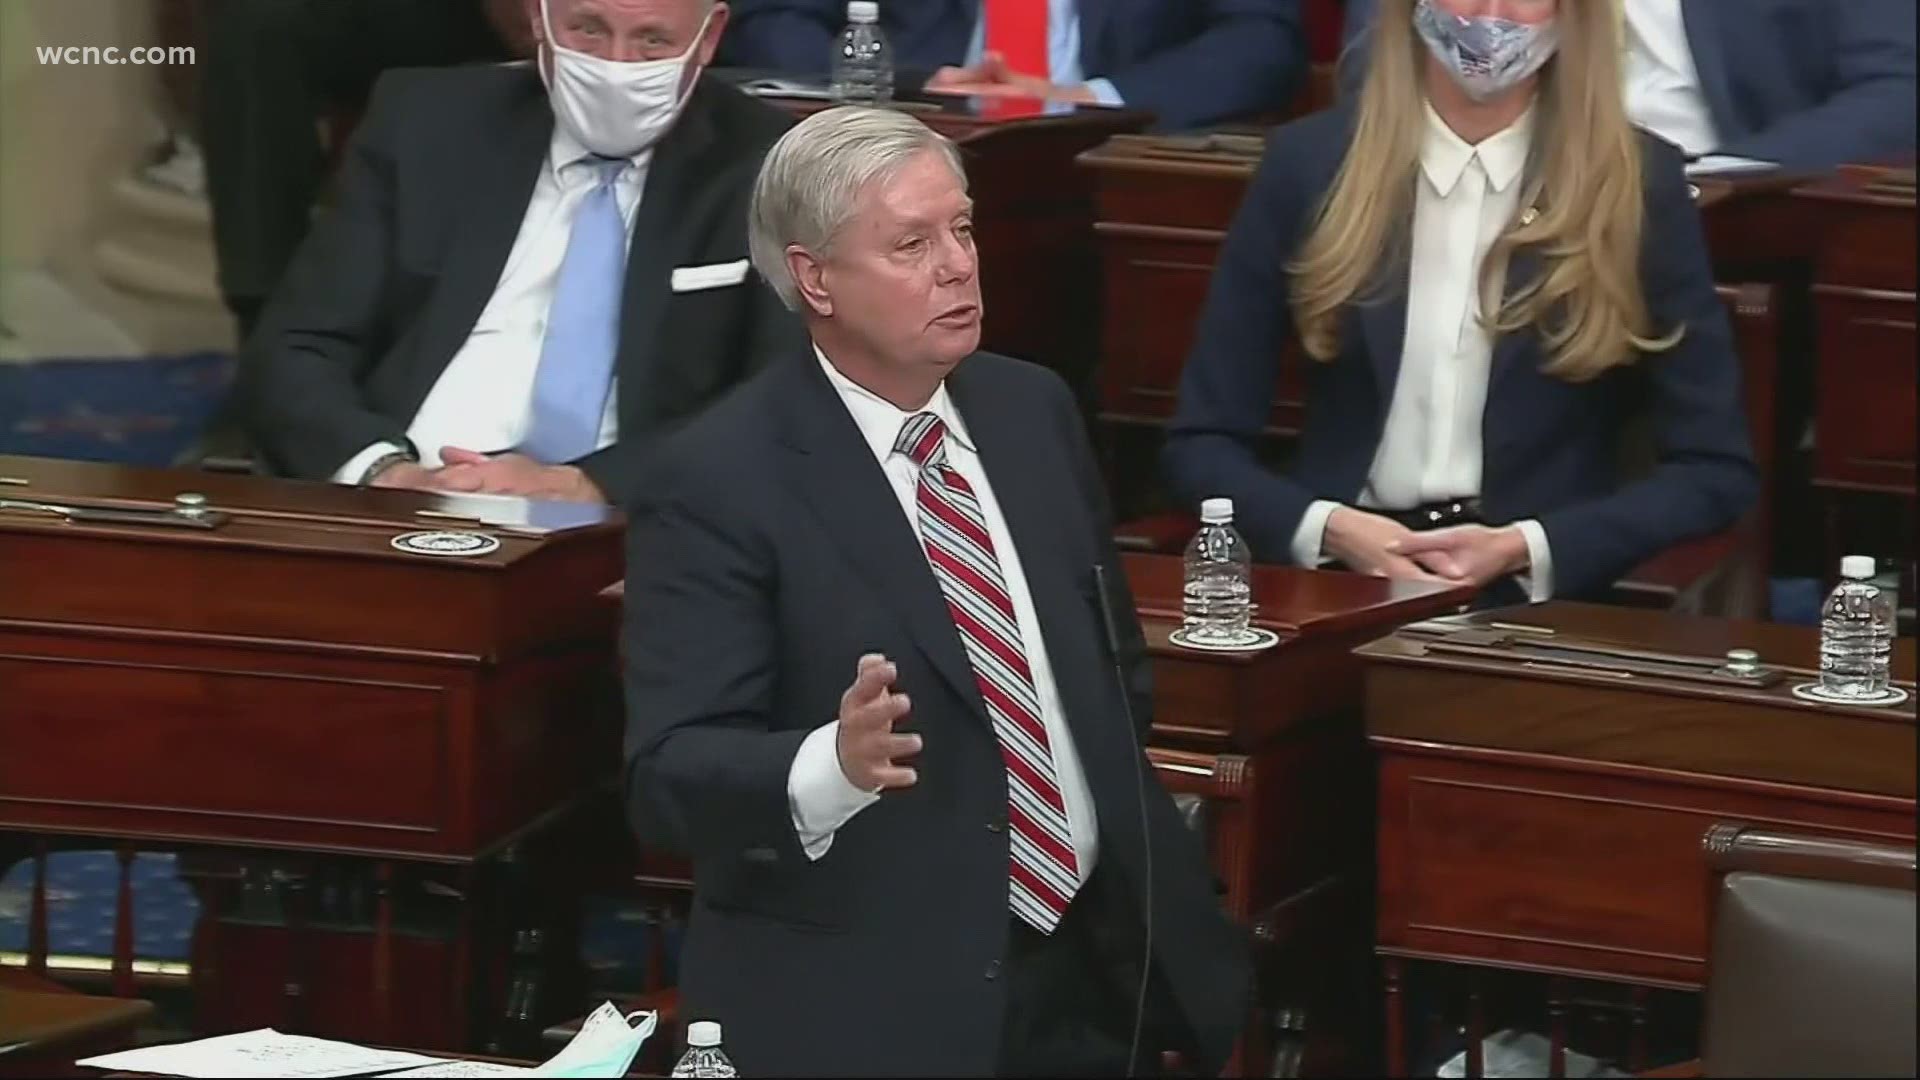 Lawmakers from across the Carolinas weighed in on Wednesday's chaos on Capitol Hill, including a passionate speech from South Carolina Sen. Lindsey Graham.